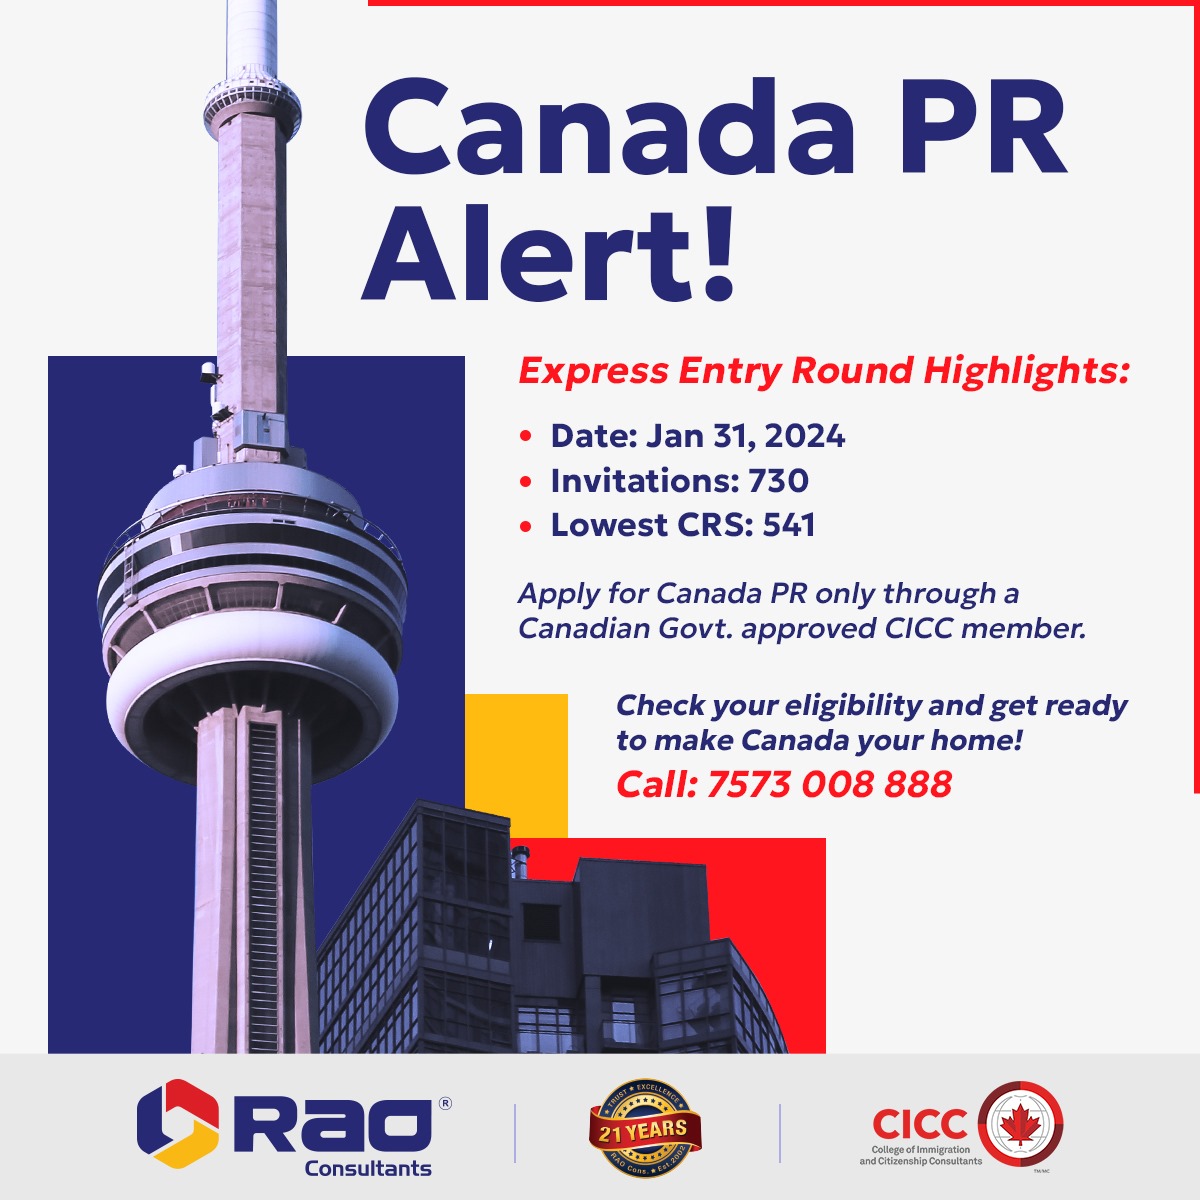 Canada just drew the curtain on its latest Express Entry draw, showering 730 invitations, and the lowest CRS dropping to an inviting 541!
#CanadaImmigration #ExpressEntry #MapleDreams #RaoConsultants #SettleAbroad #NewBeginnings #GlobalCitizen #LivingAbroad